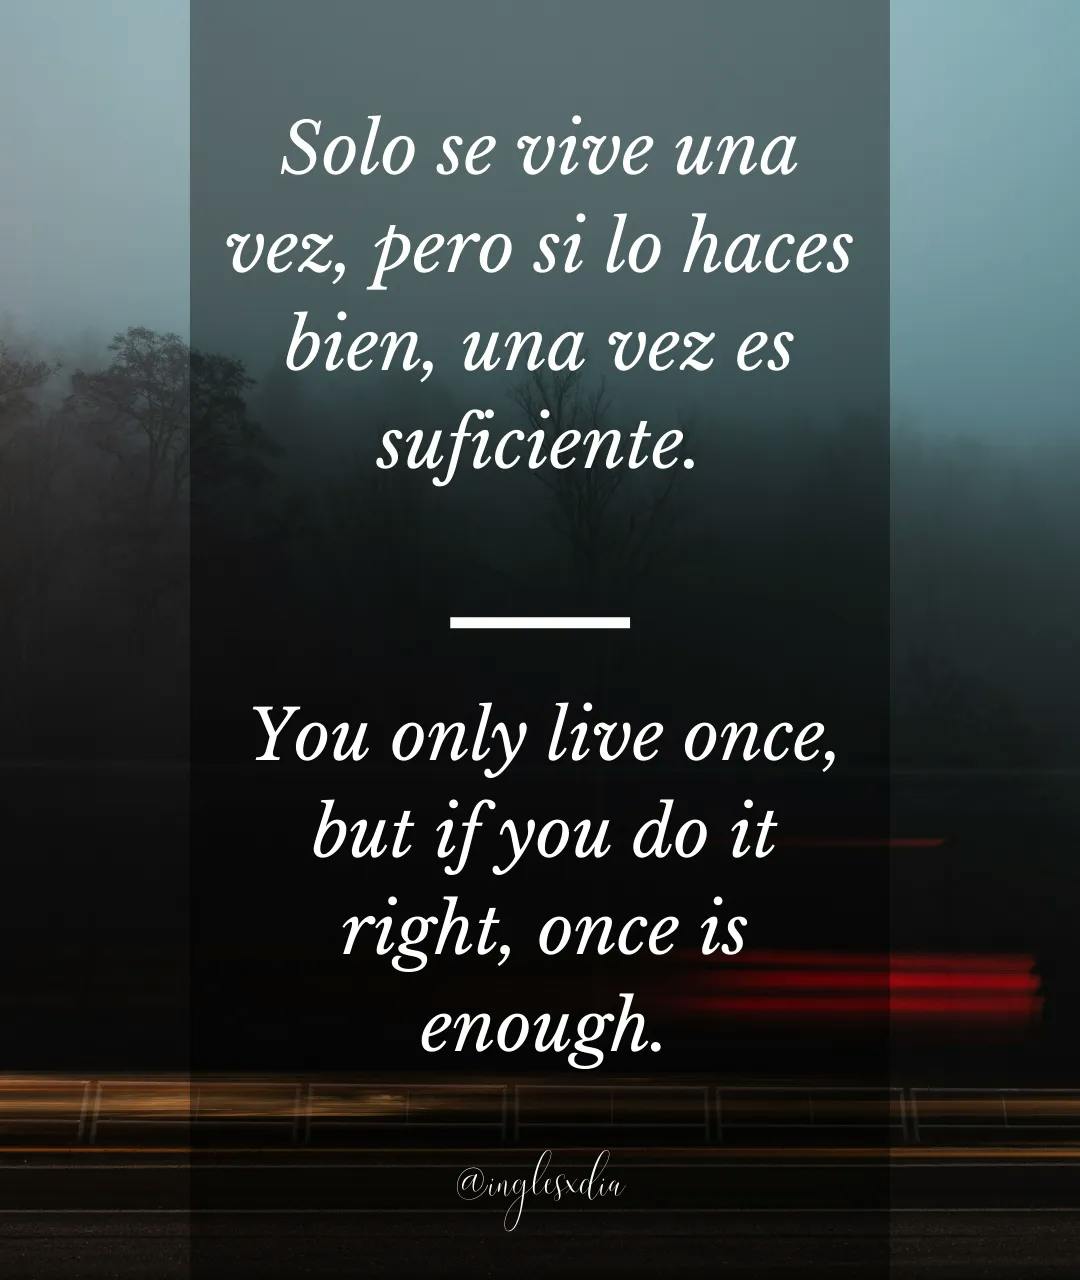 Frases motivadoras en inglés: You only live once but if you do it right, once is enough.